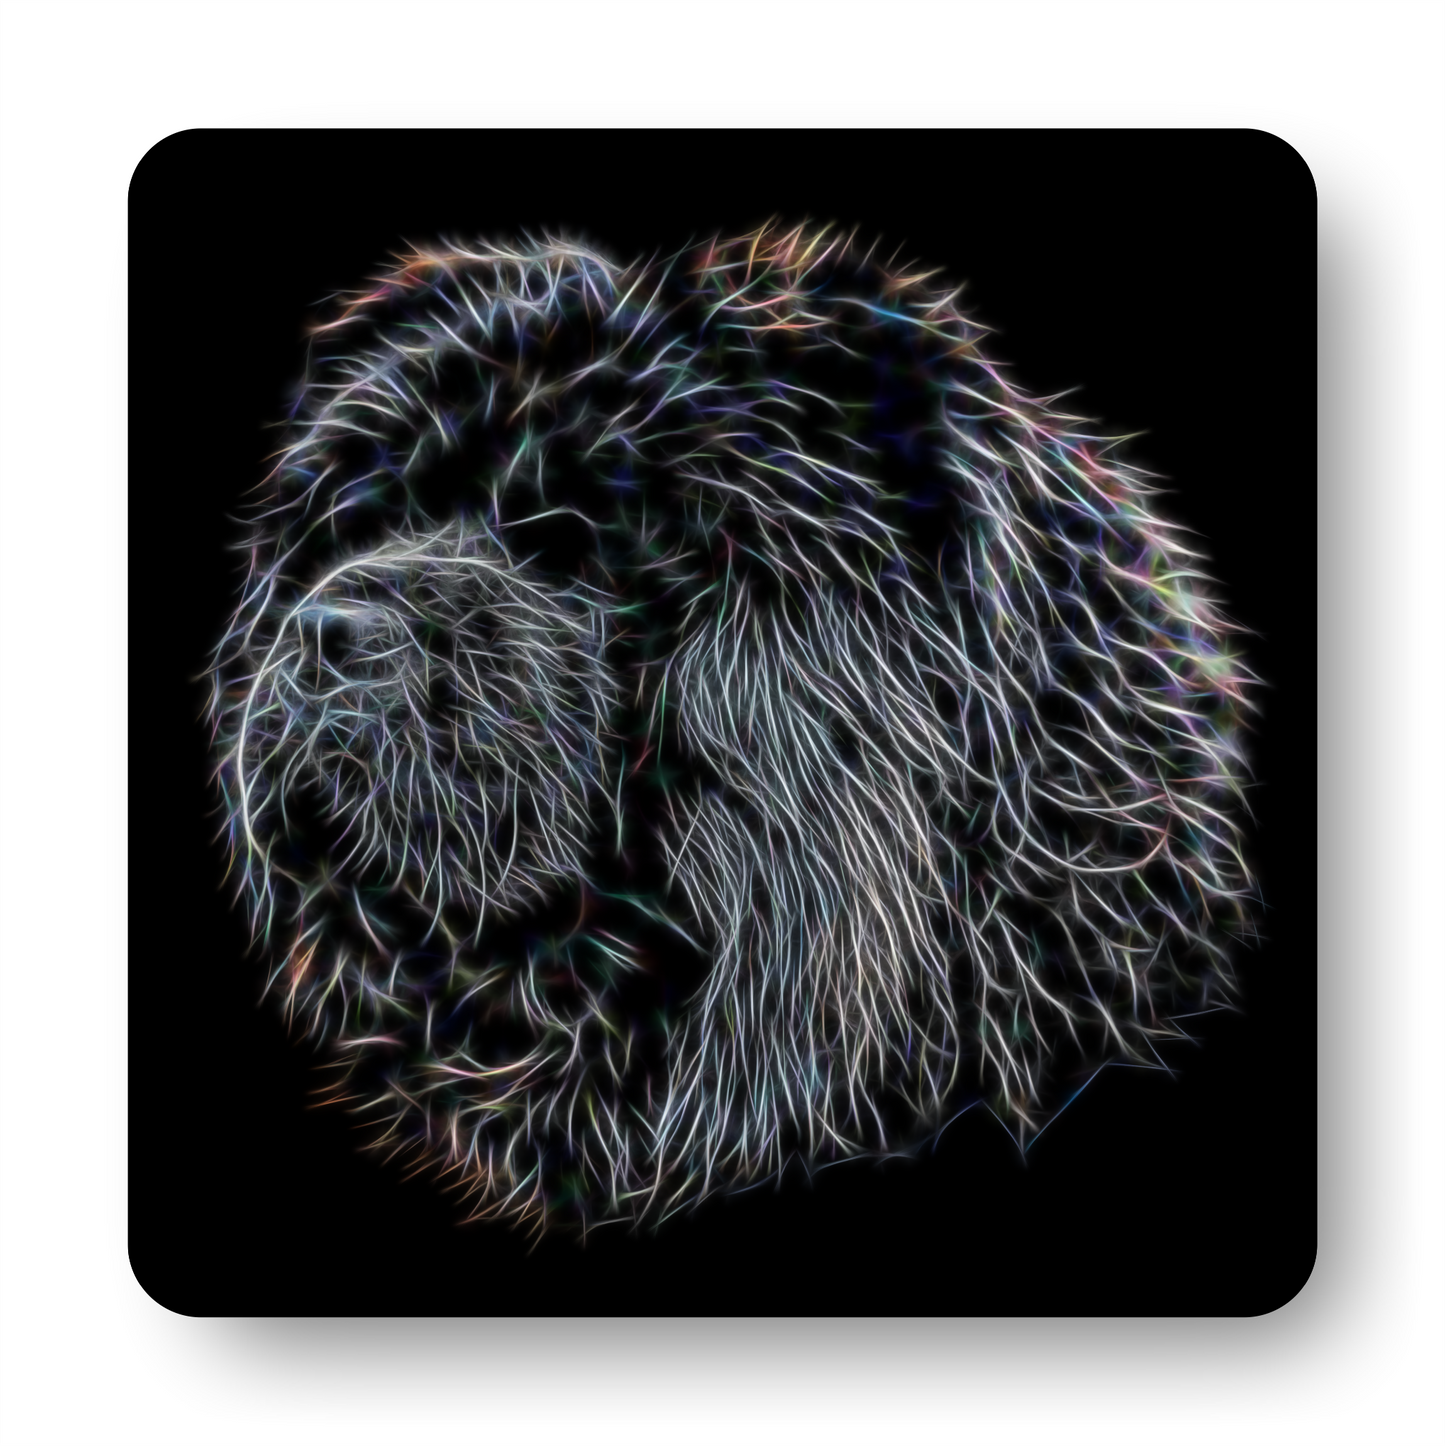 Chow Chow - Black Chow Chow Coasters with Fractal Art Design